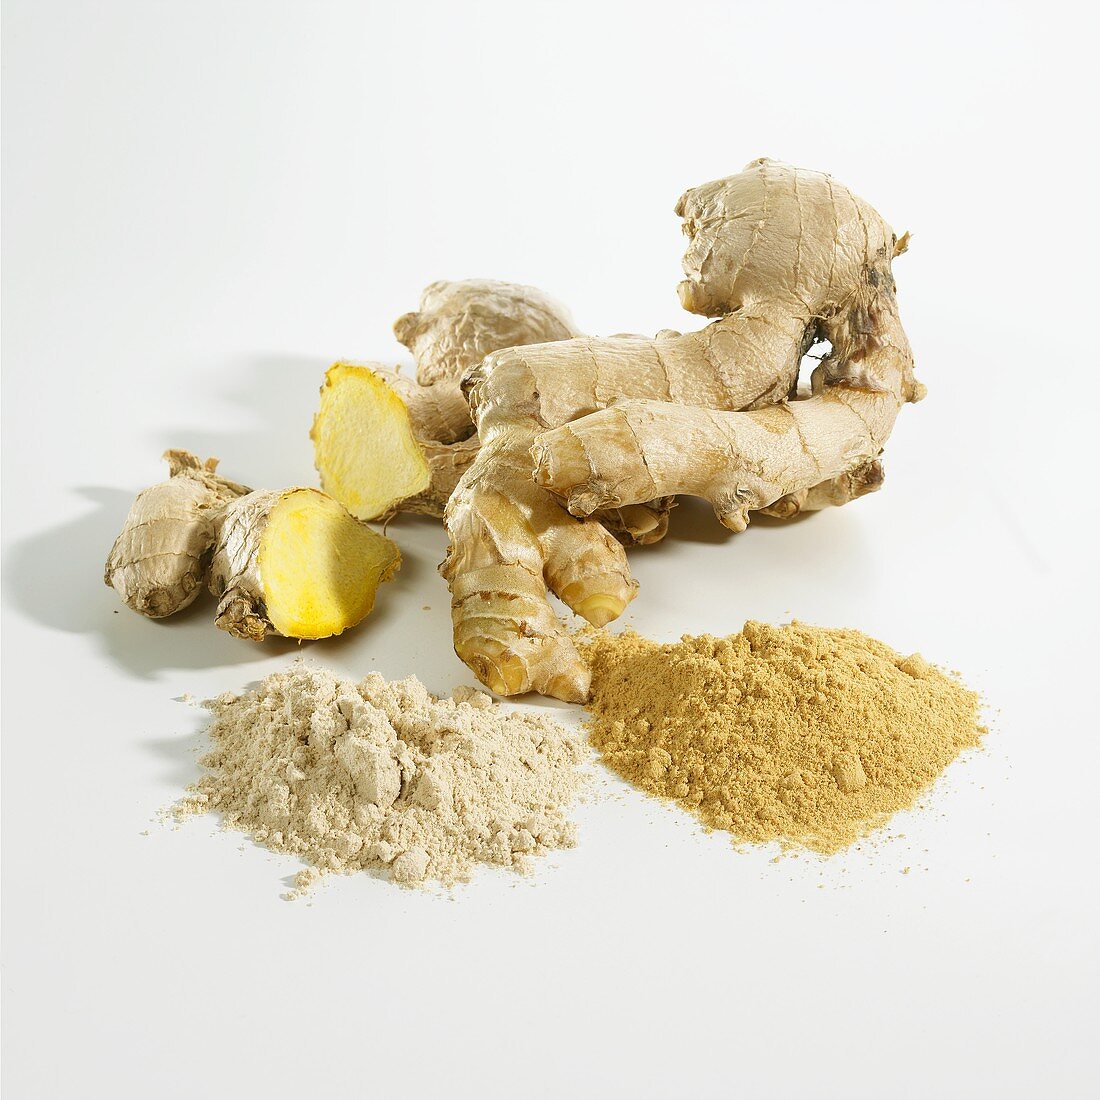 Fresh ginger root and ground ginger